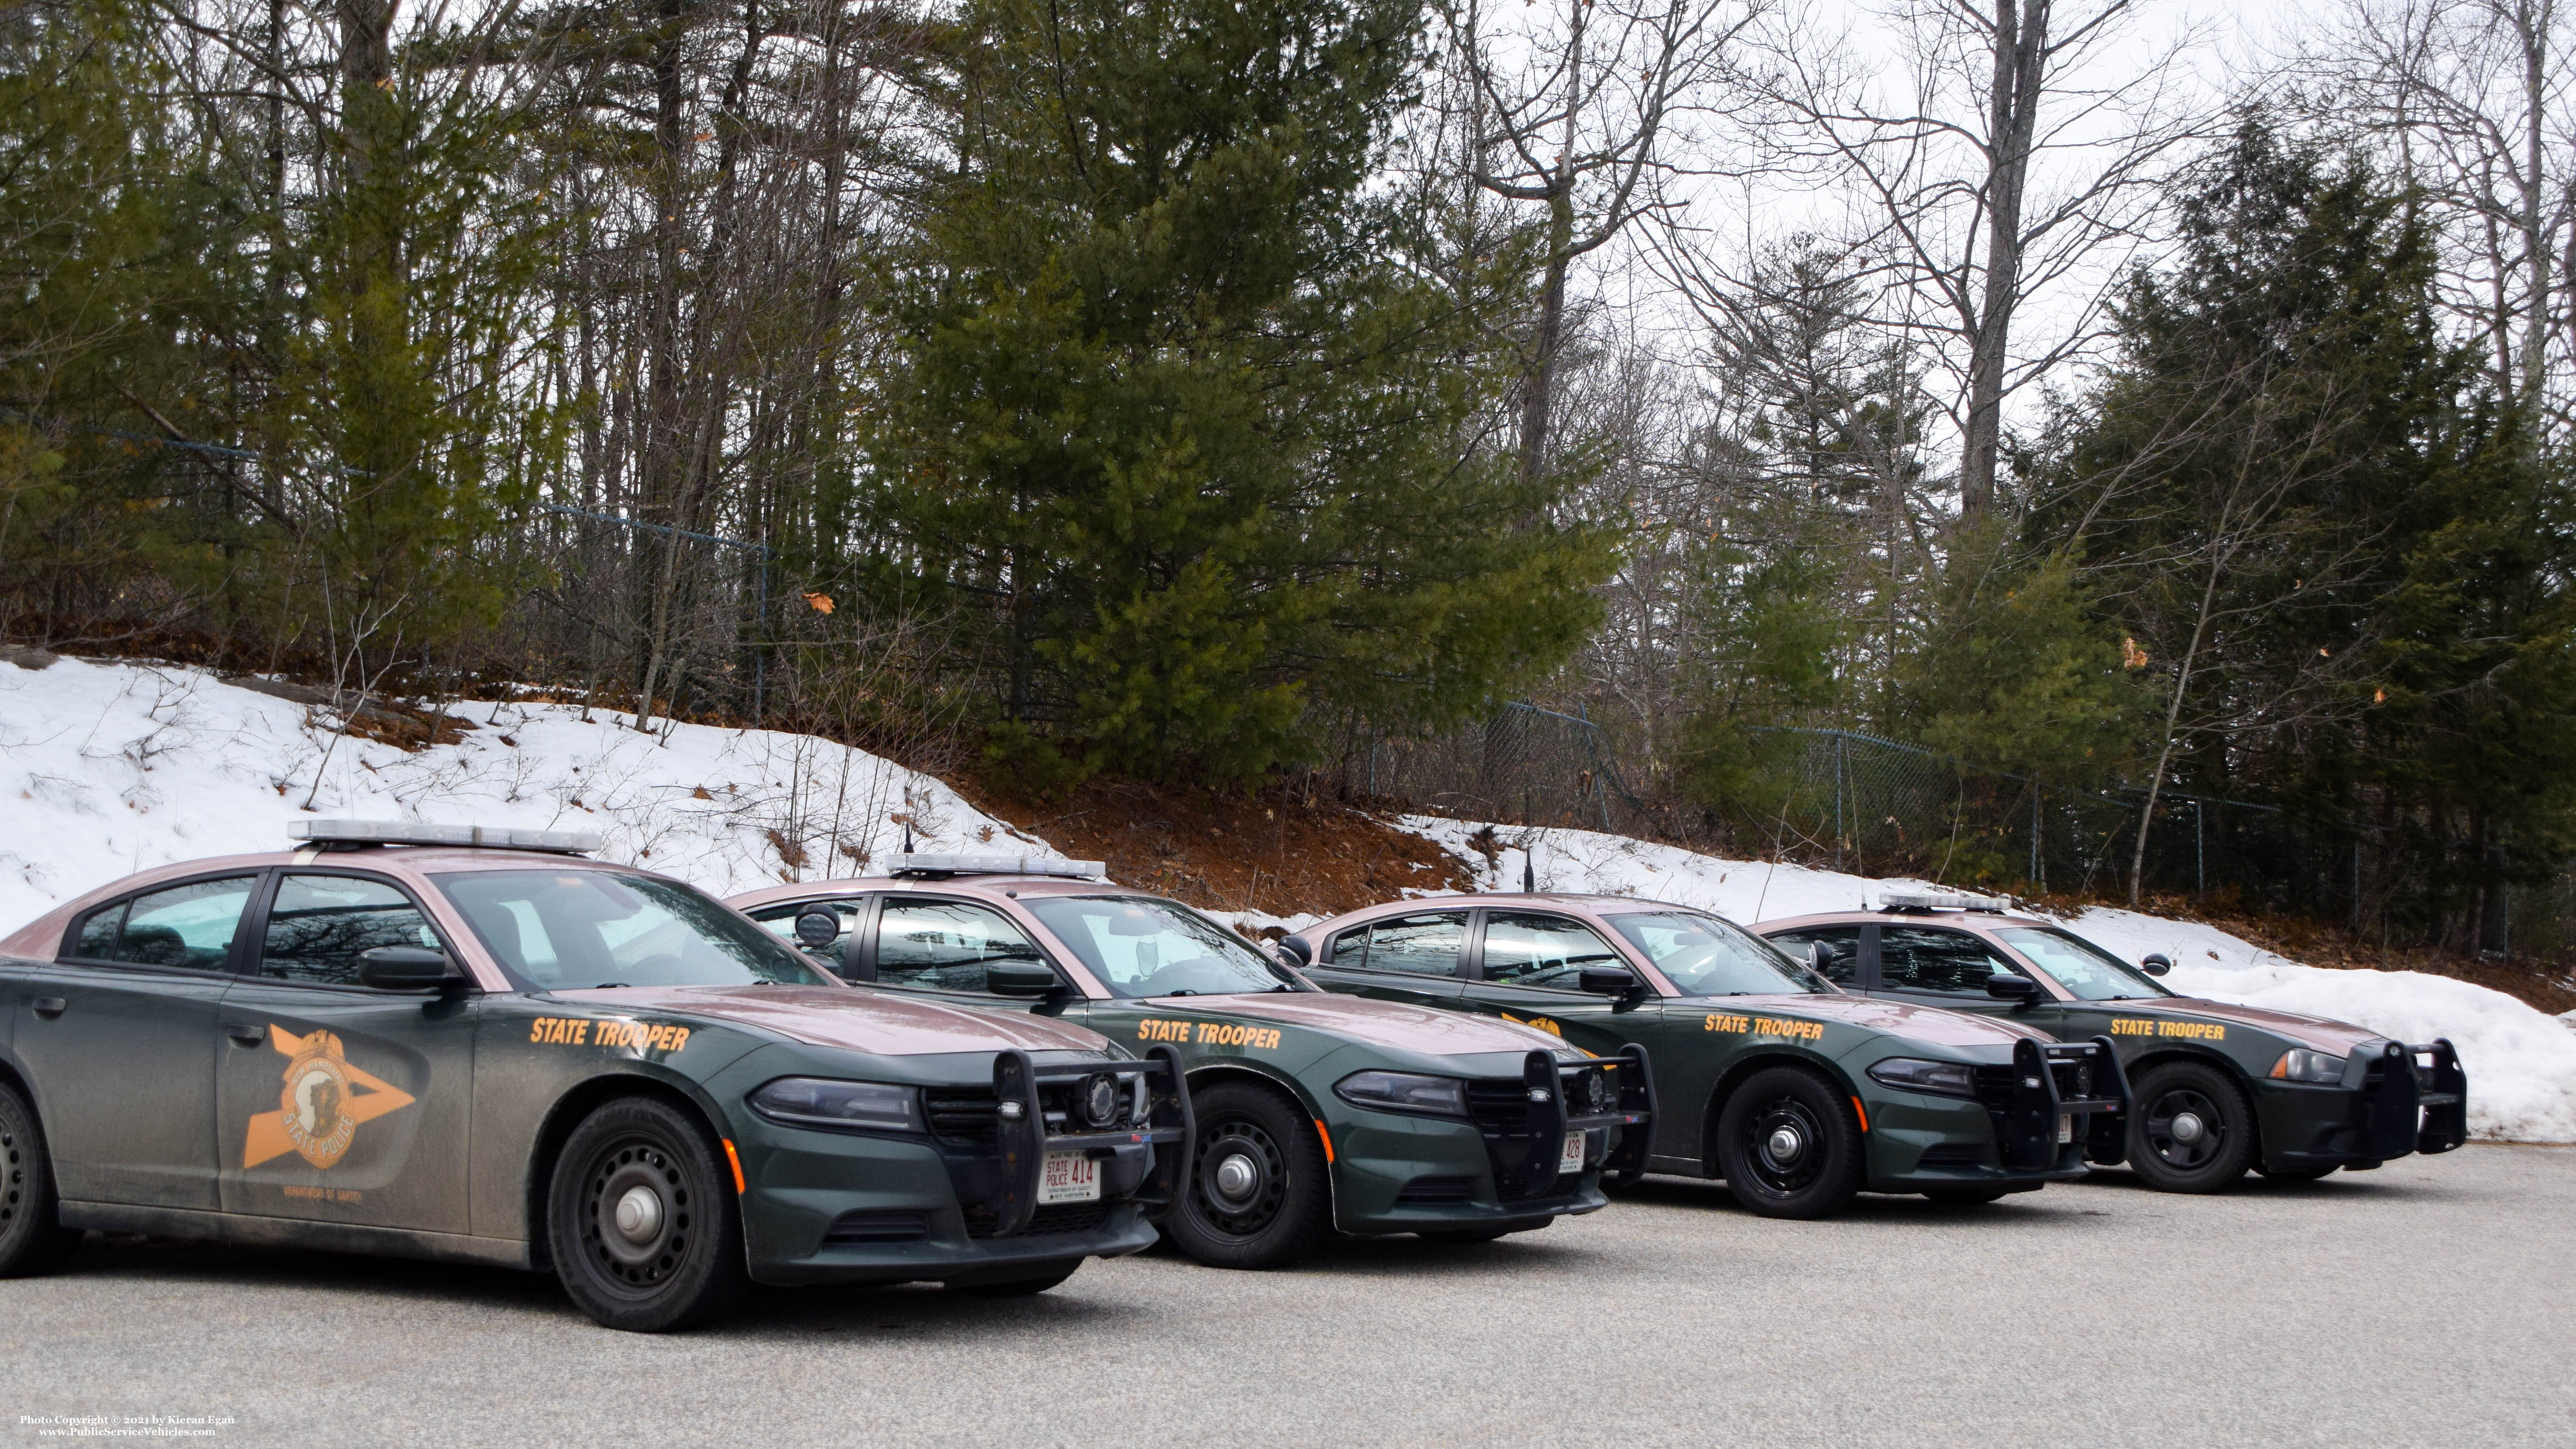 A photo  of New Hampshire State Police
            Cruiser 428, a 2015-2019 Dodge Charger             taken by Kieran Egan